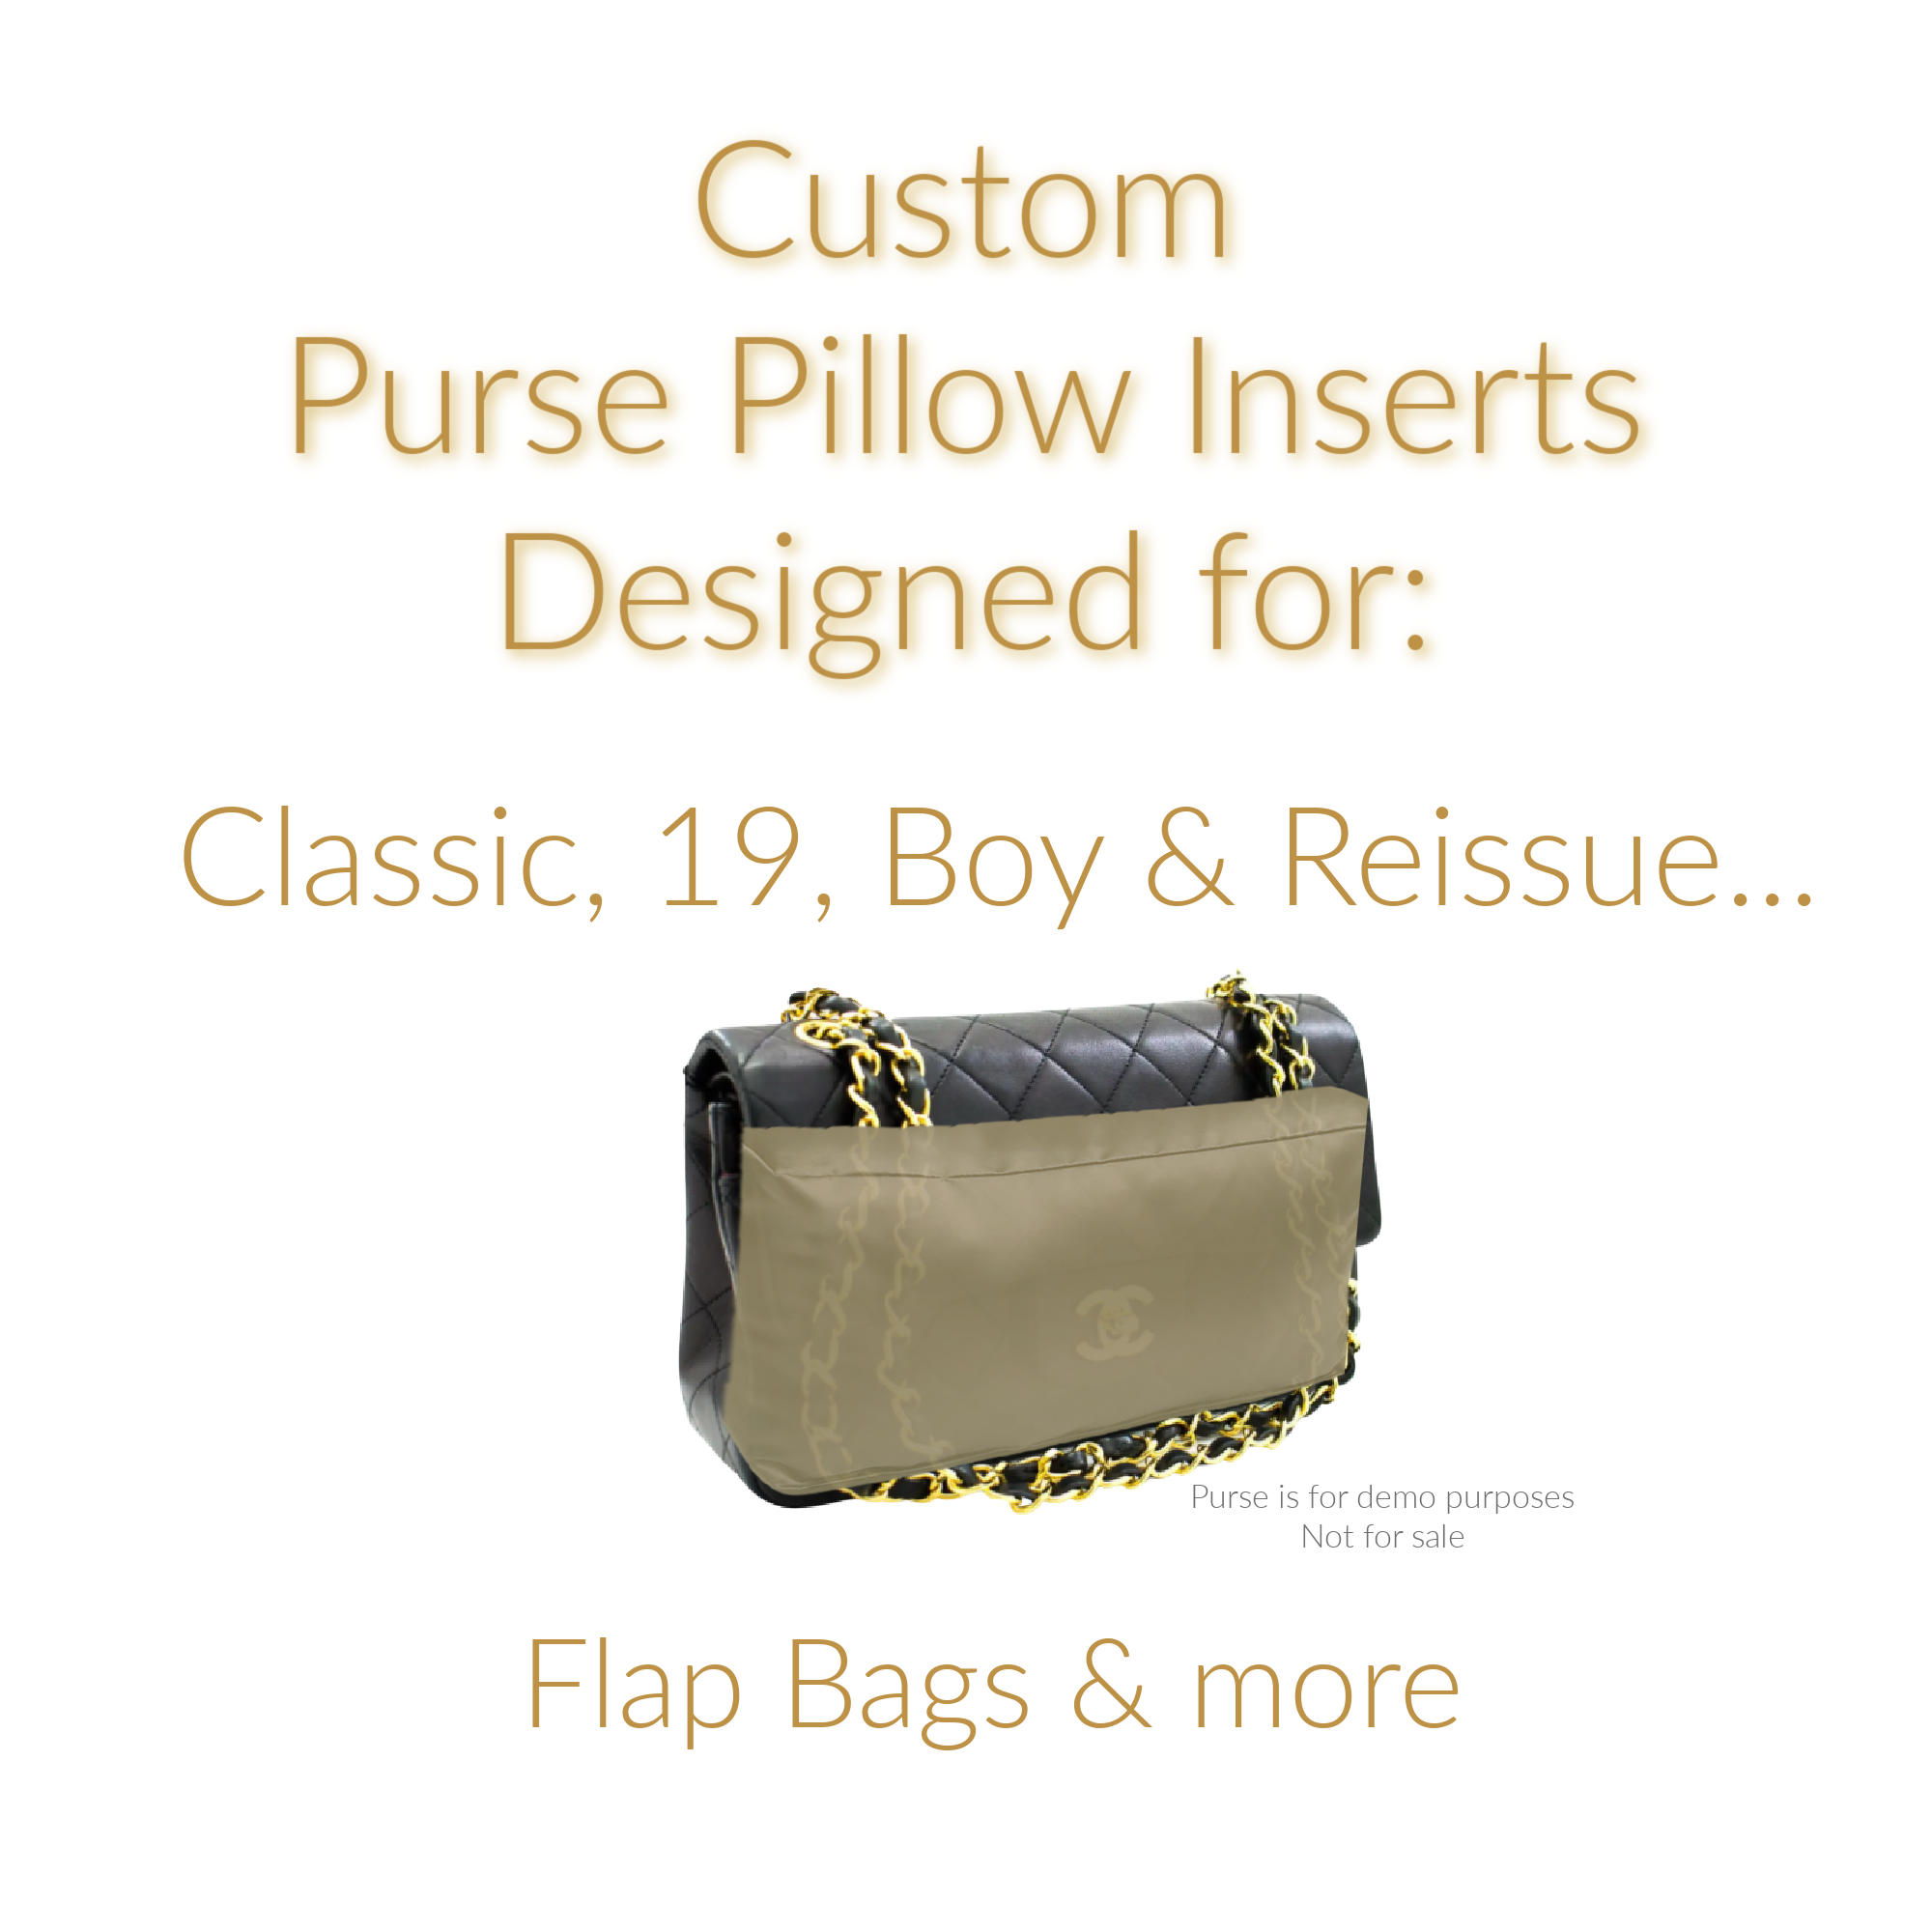 Purse Insert Pillows for Flap Handbags | Shaper Forms for all the 19,  Reissue, Boy, & Classic Bags | Best Purse Storage |Handmade in USA